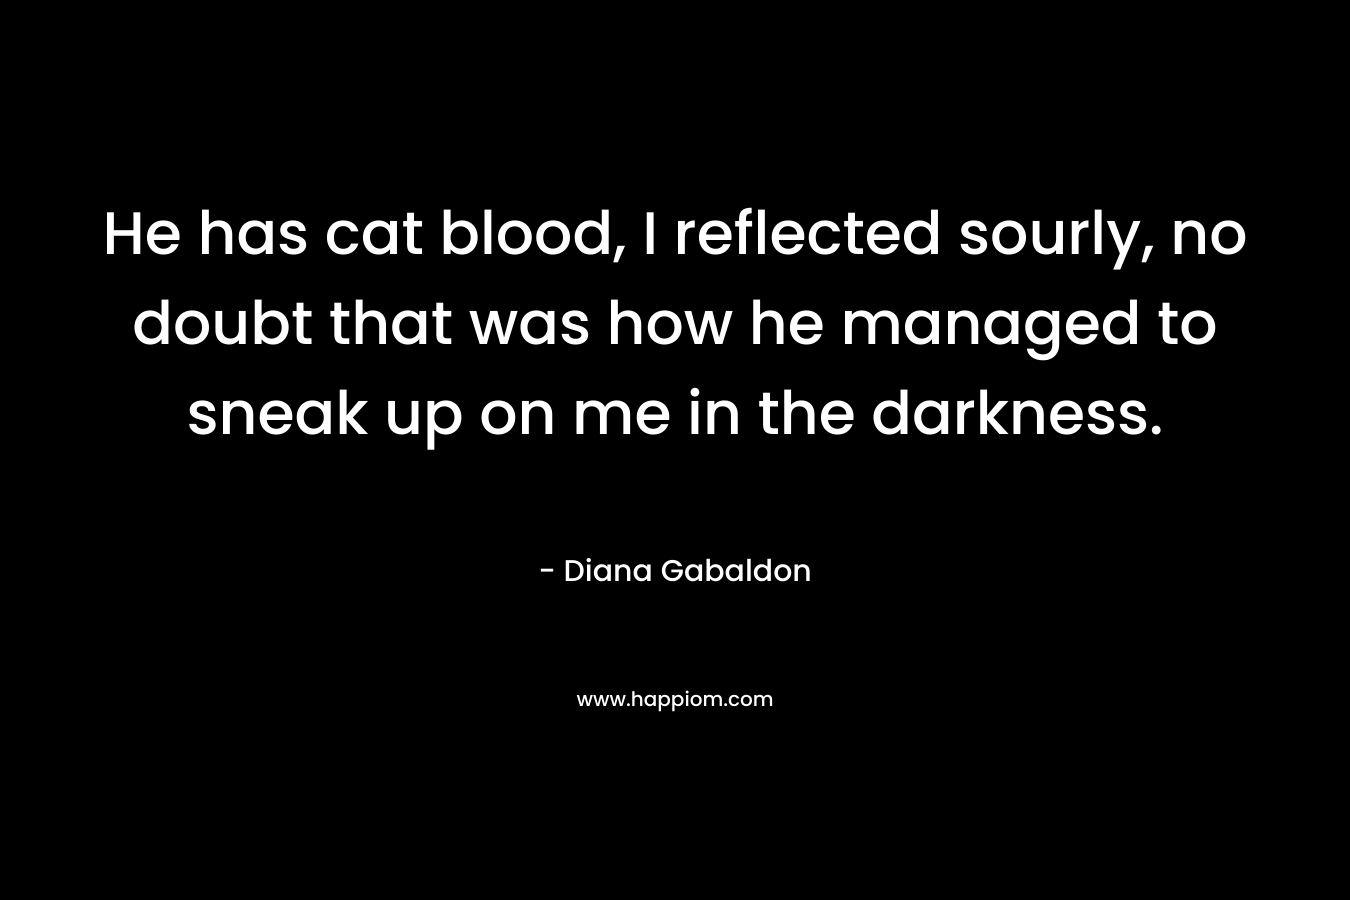 He has cat blood, I reflected sourly, no doubt that was how he managed to sneak up on me in the darkness. – Diana Gabaldon